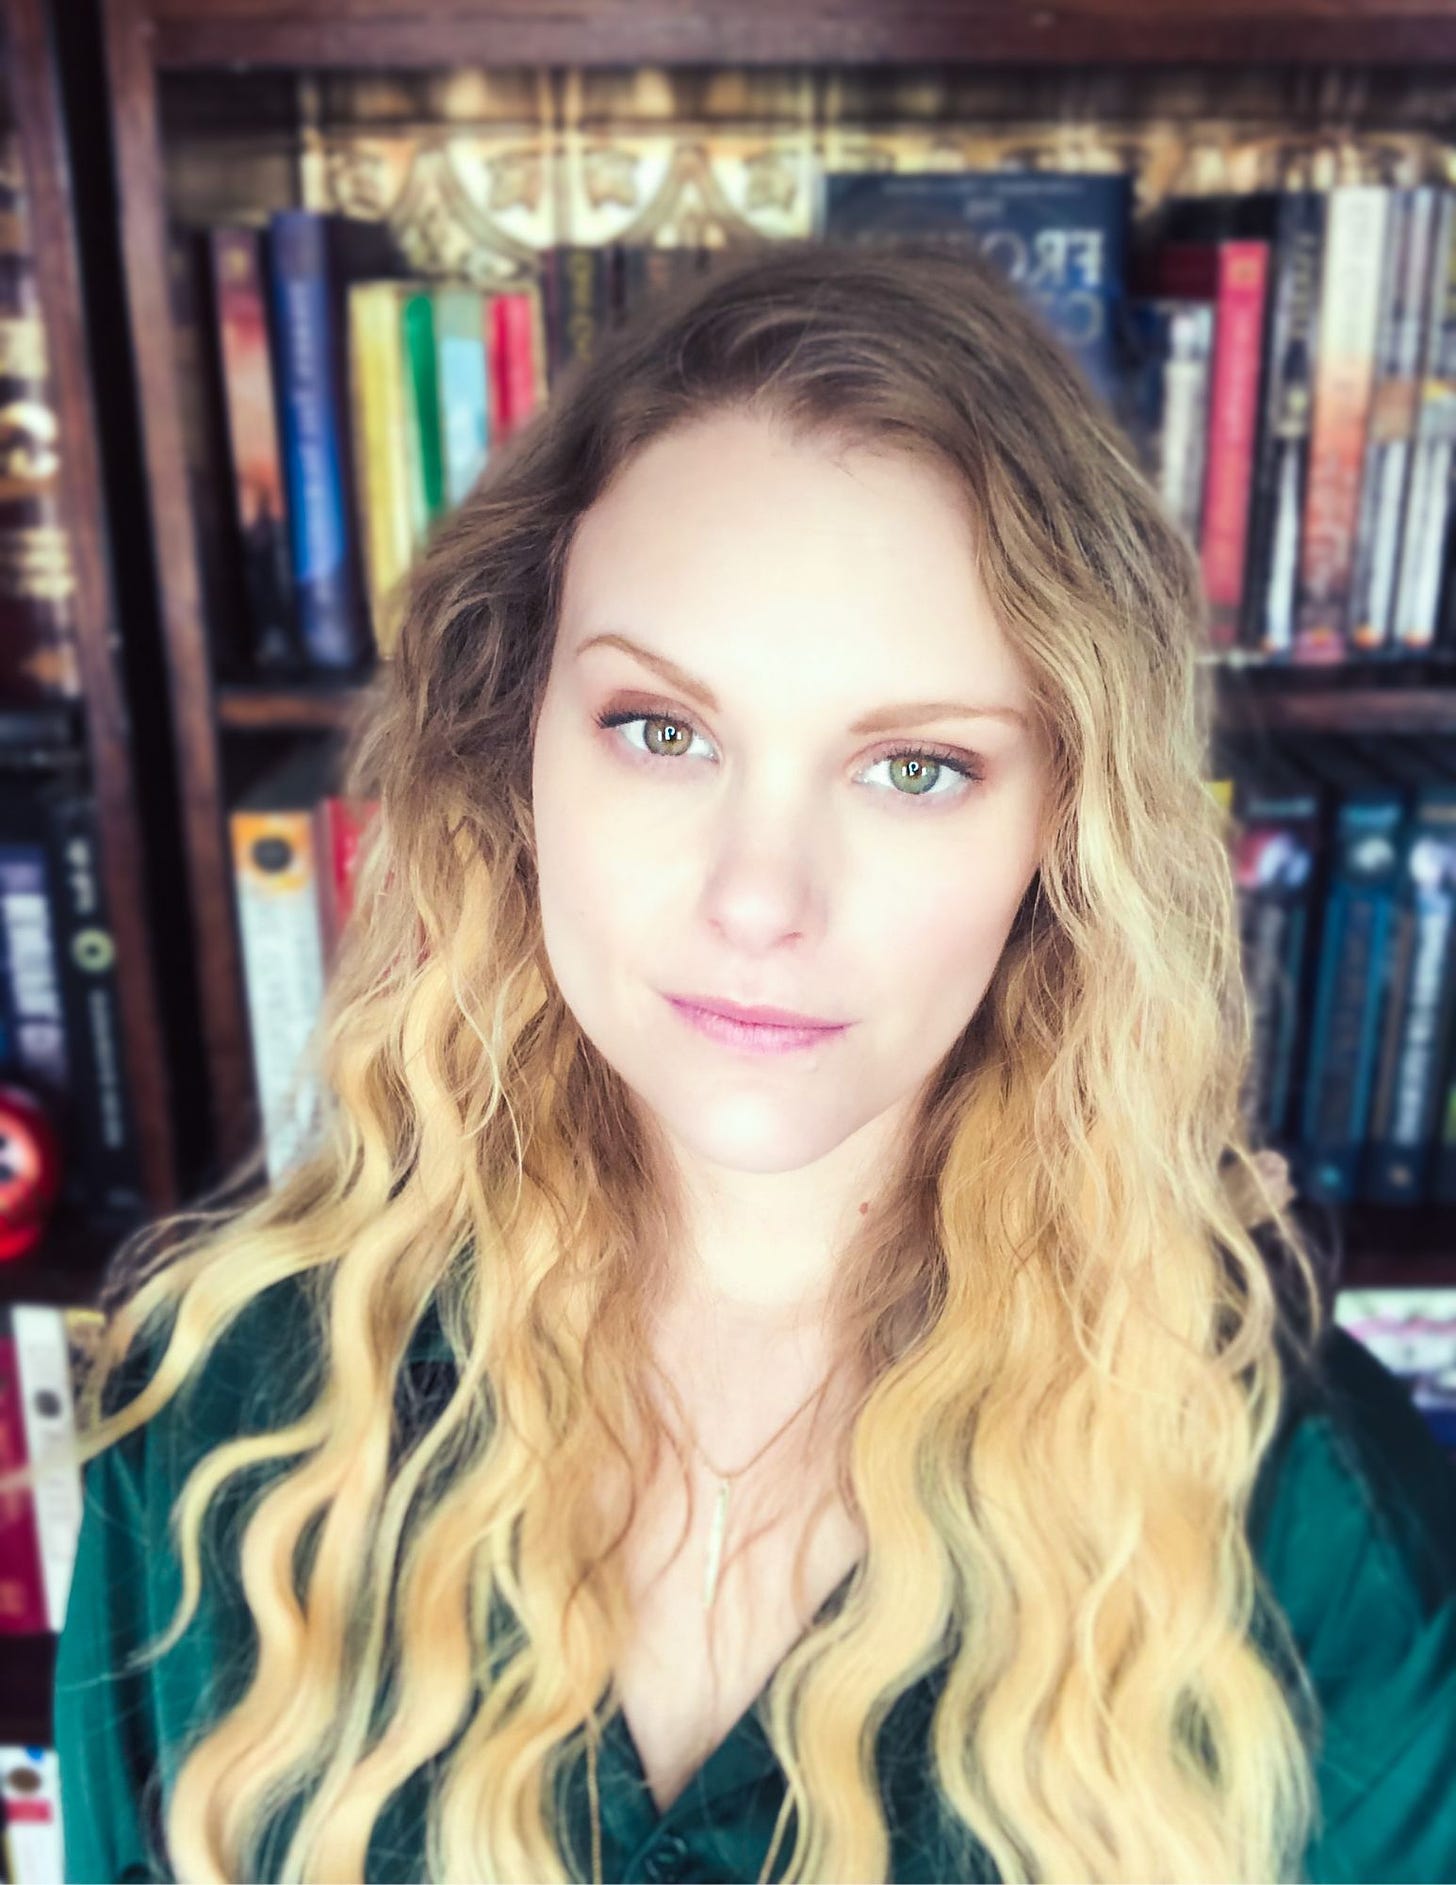 A picture of a white woman with blonde hair and a green shirt.